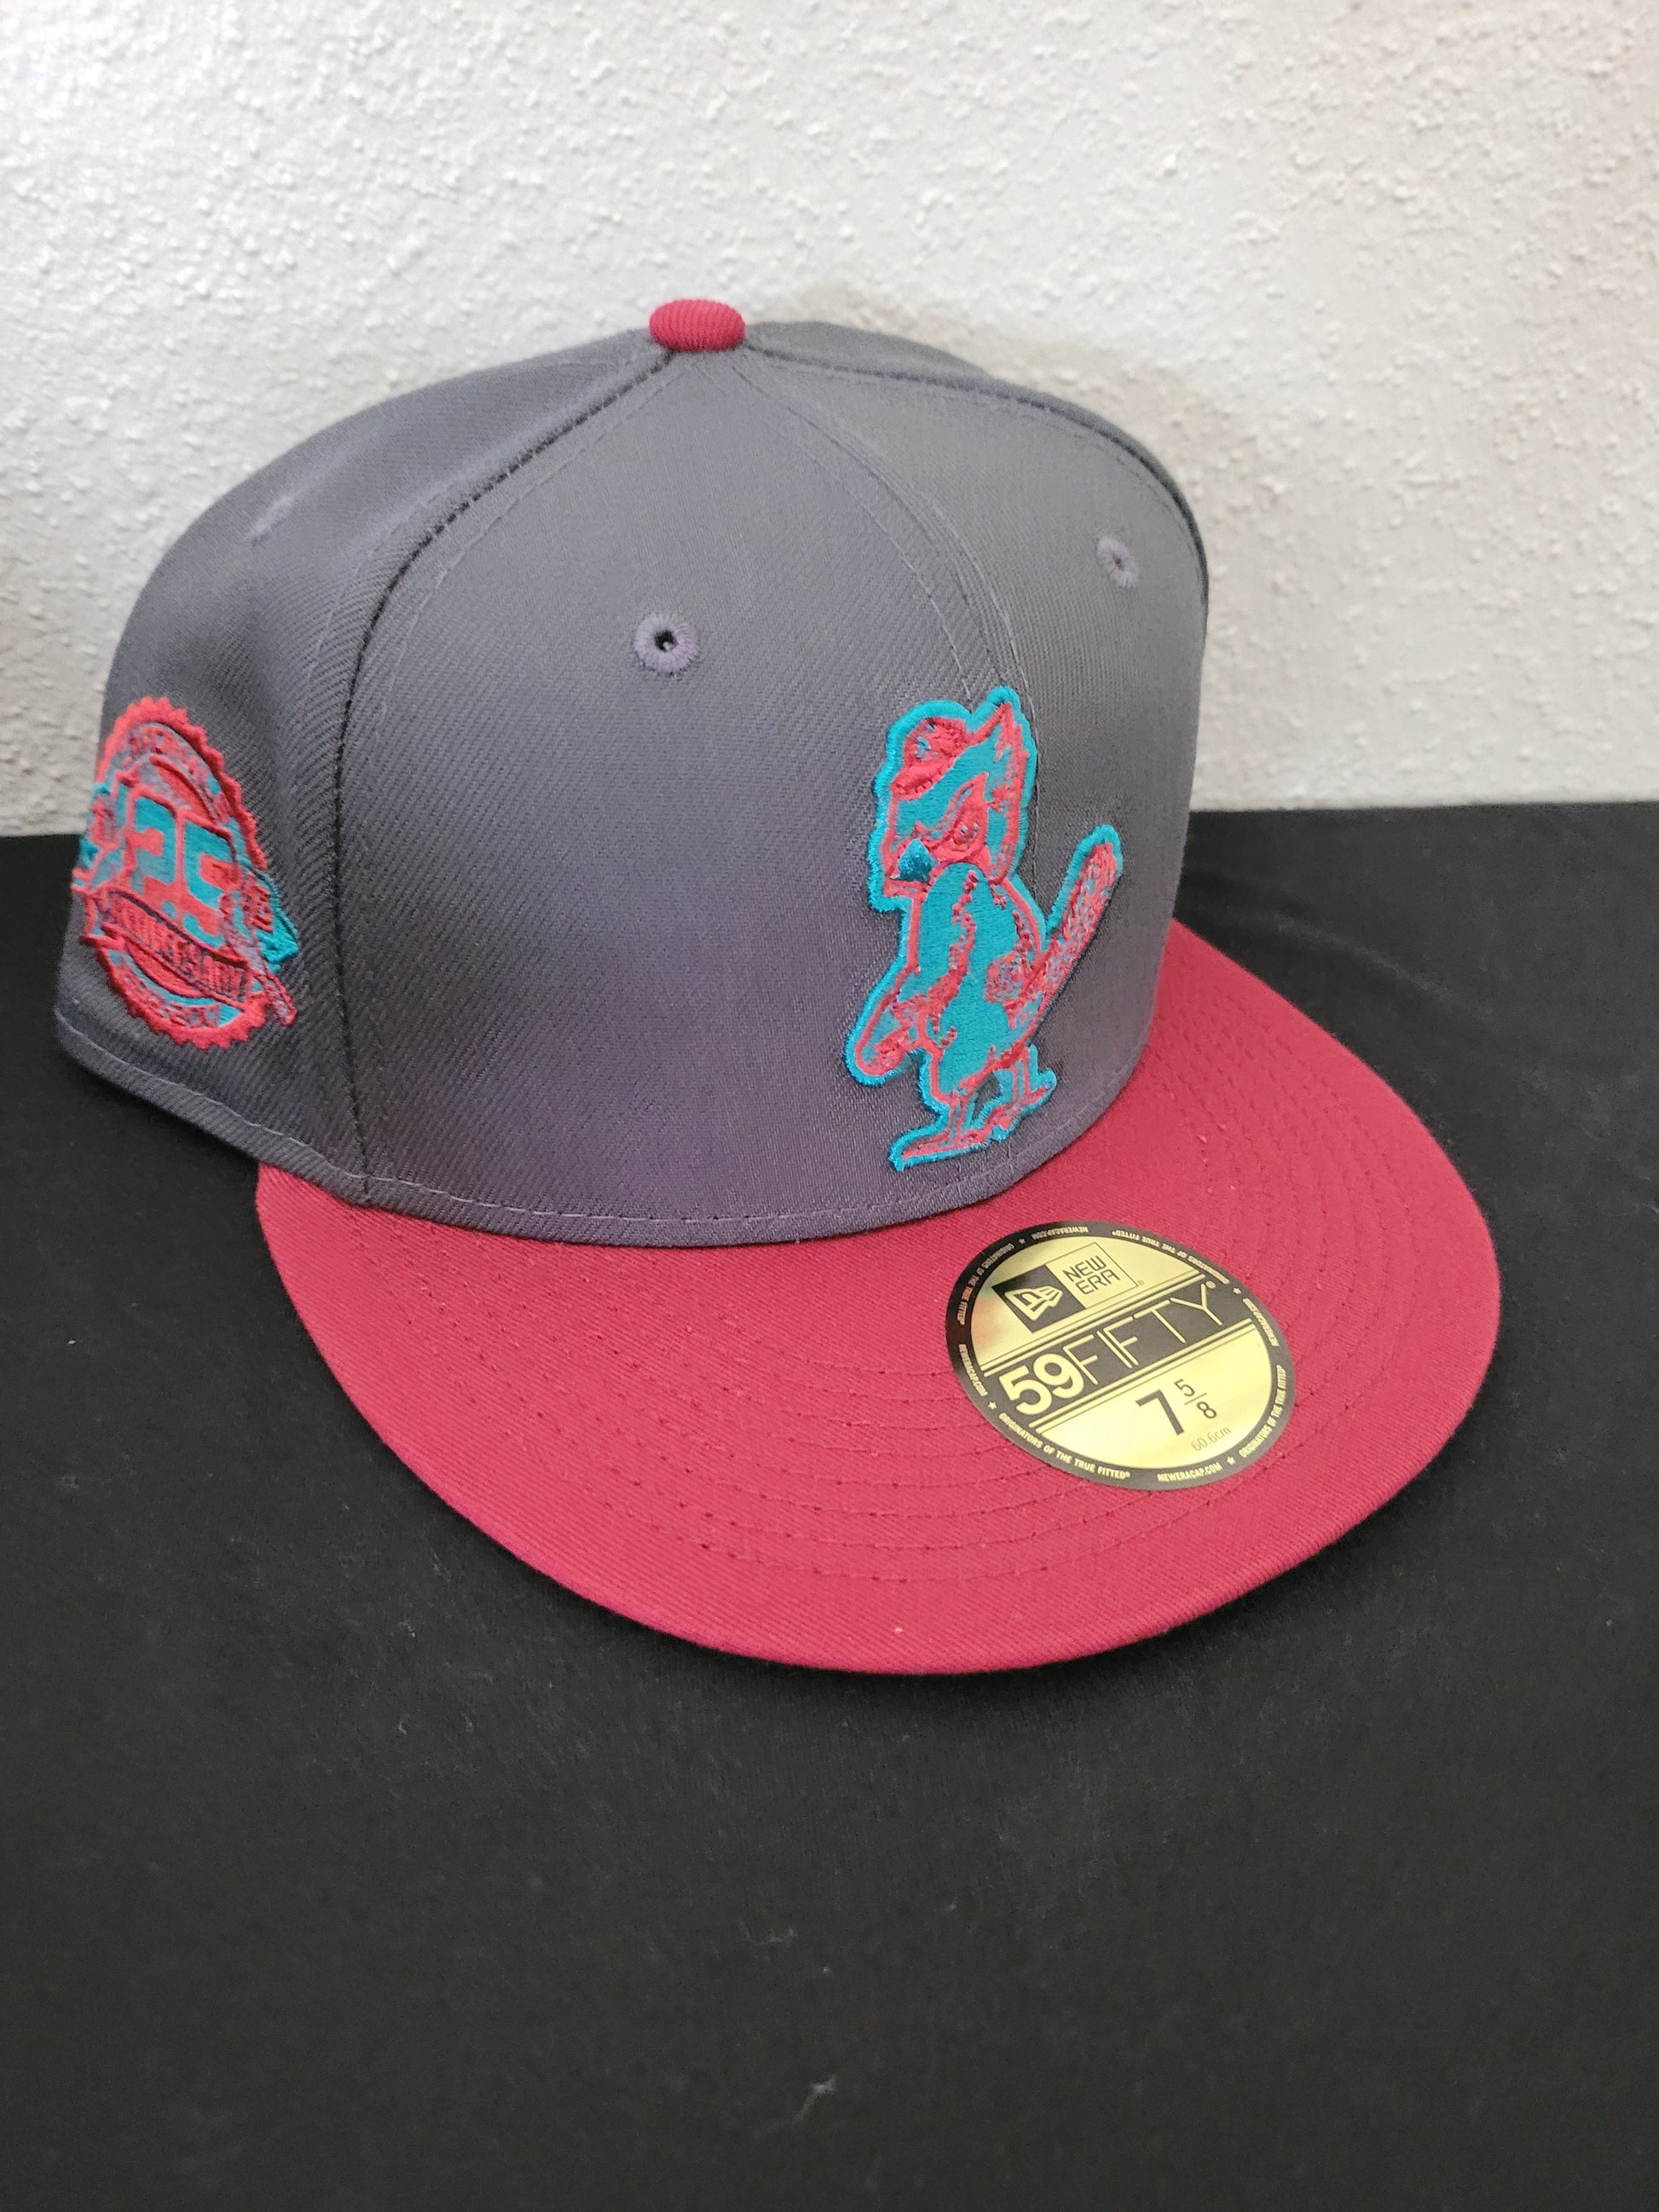 St Louis Cardinals Lids Exclusive New Era Hat – Fitted BLVD